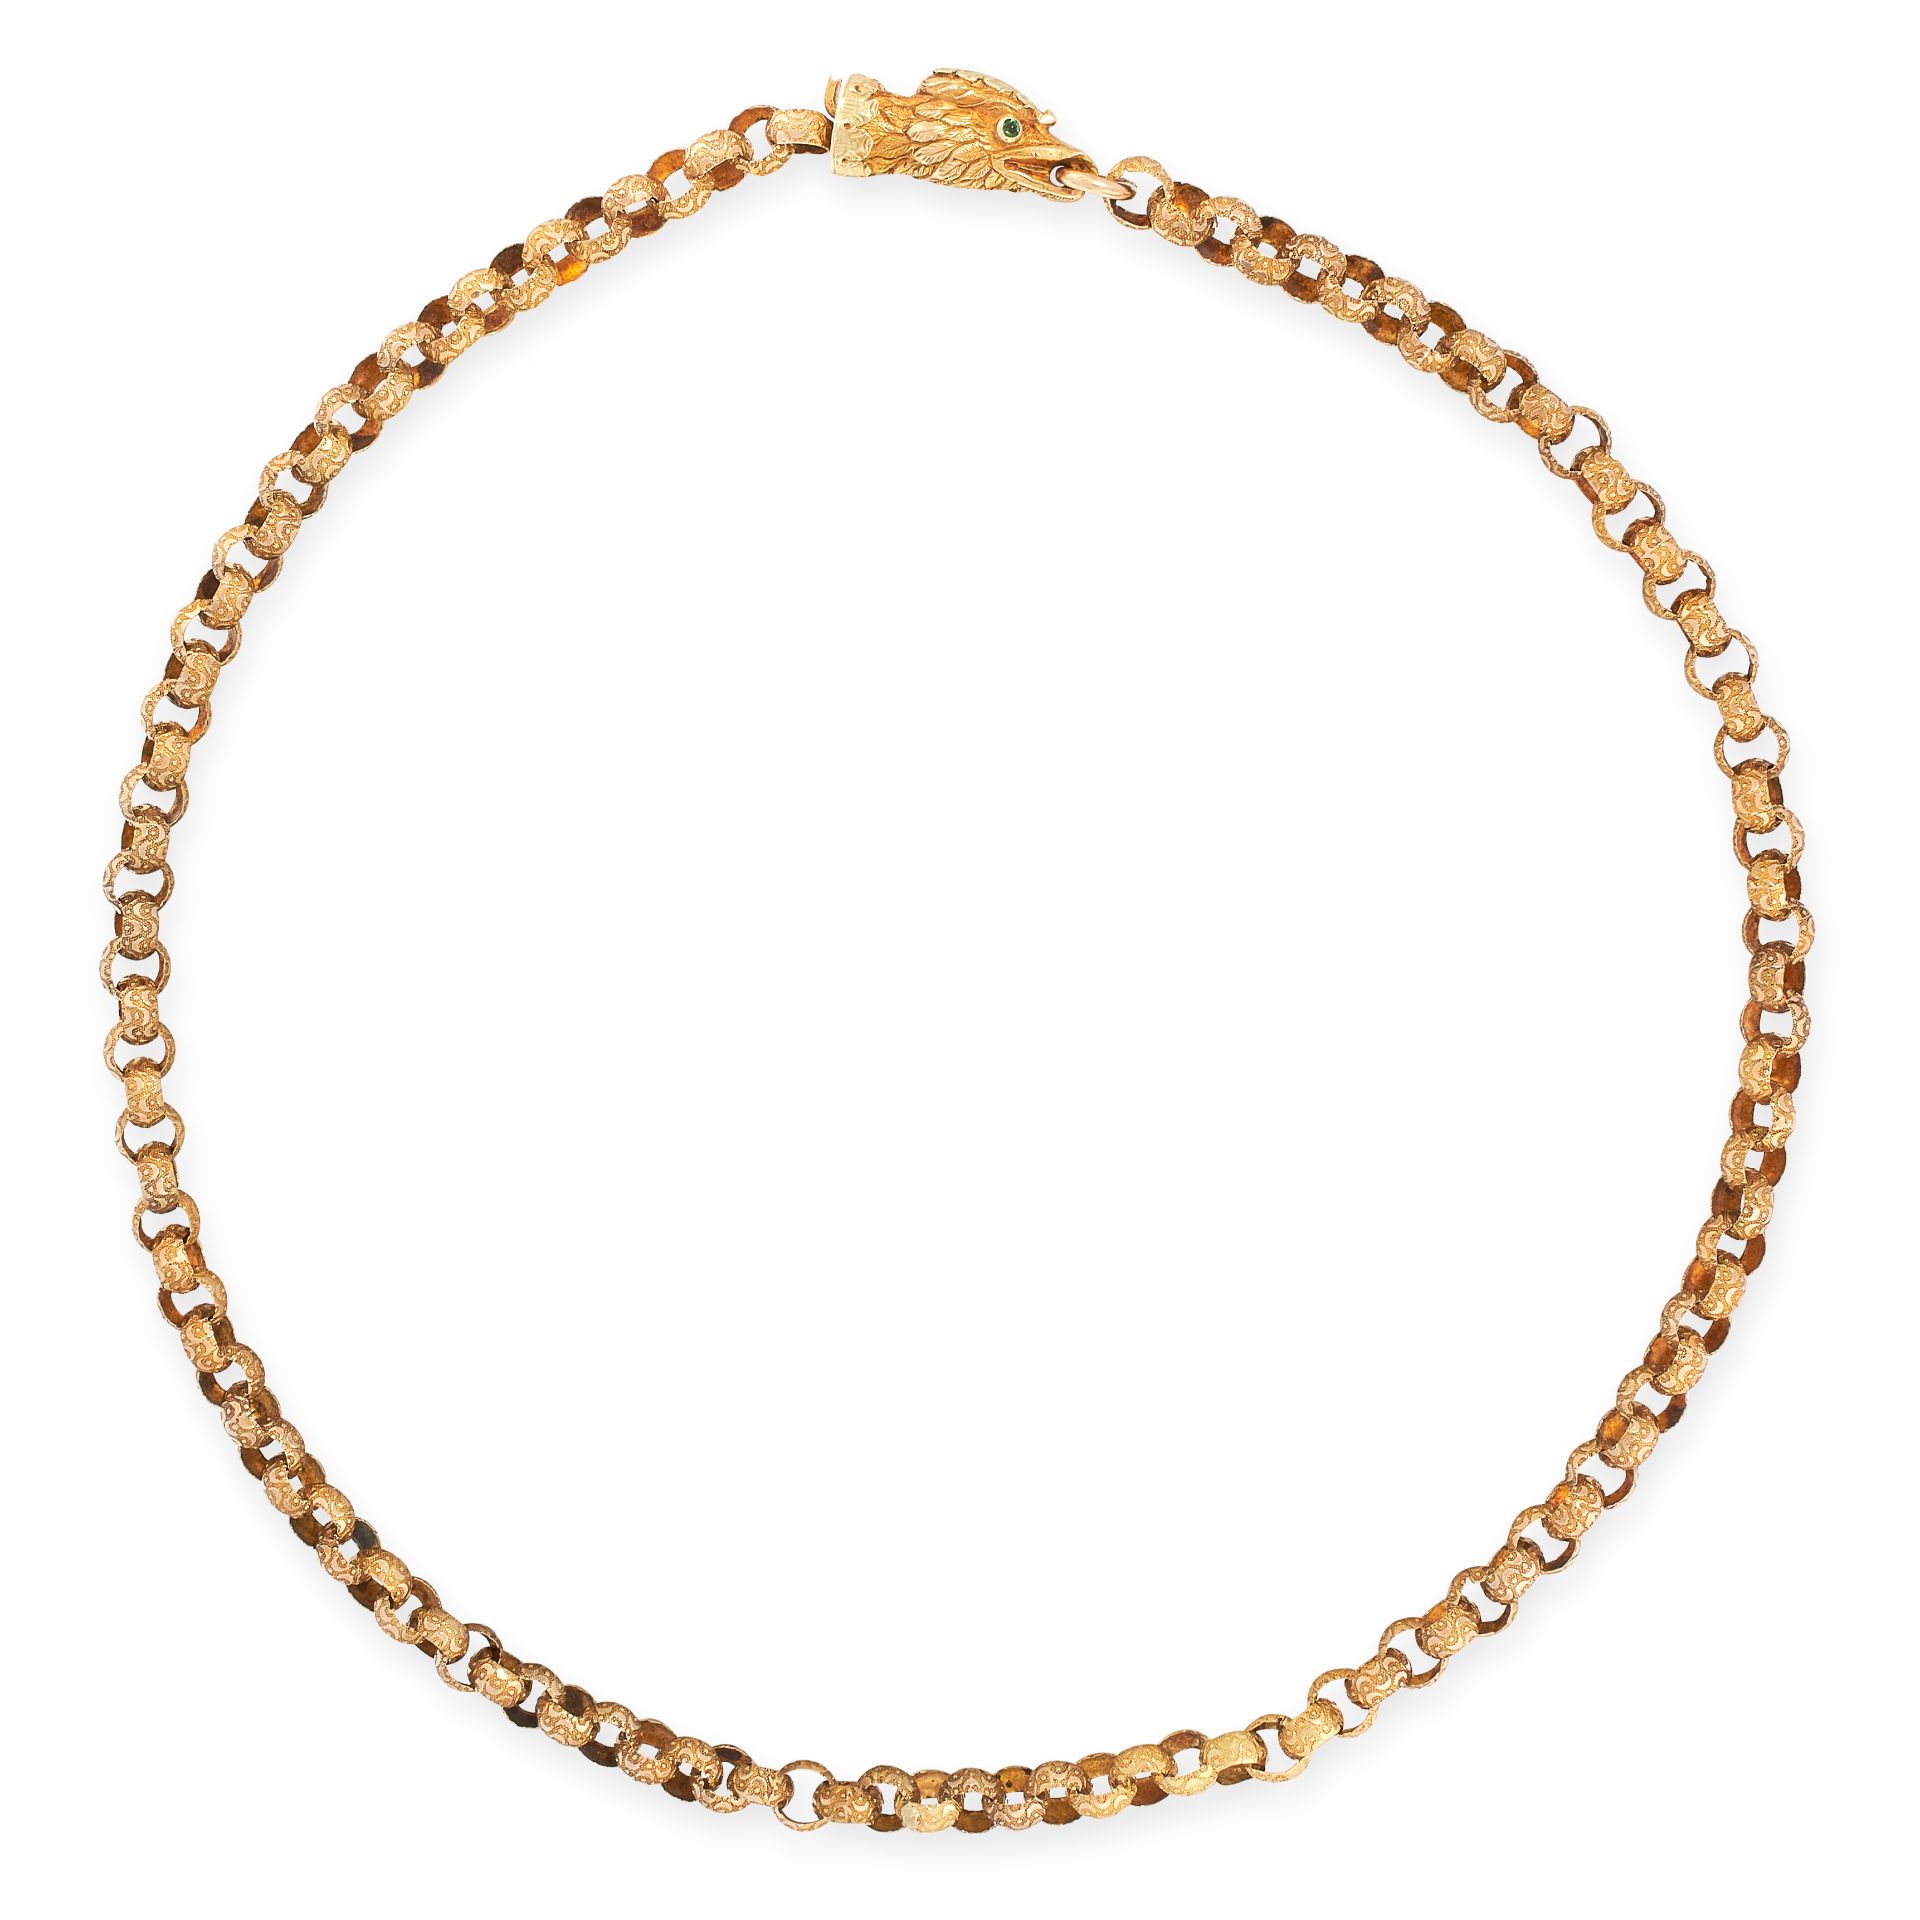 AN ANTIQUE FANCY LINK EAGLES HEAD CHAIN NECKLACE, EARLY 19TH CENTURY in high carat yellow gold,